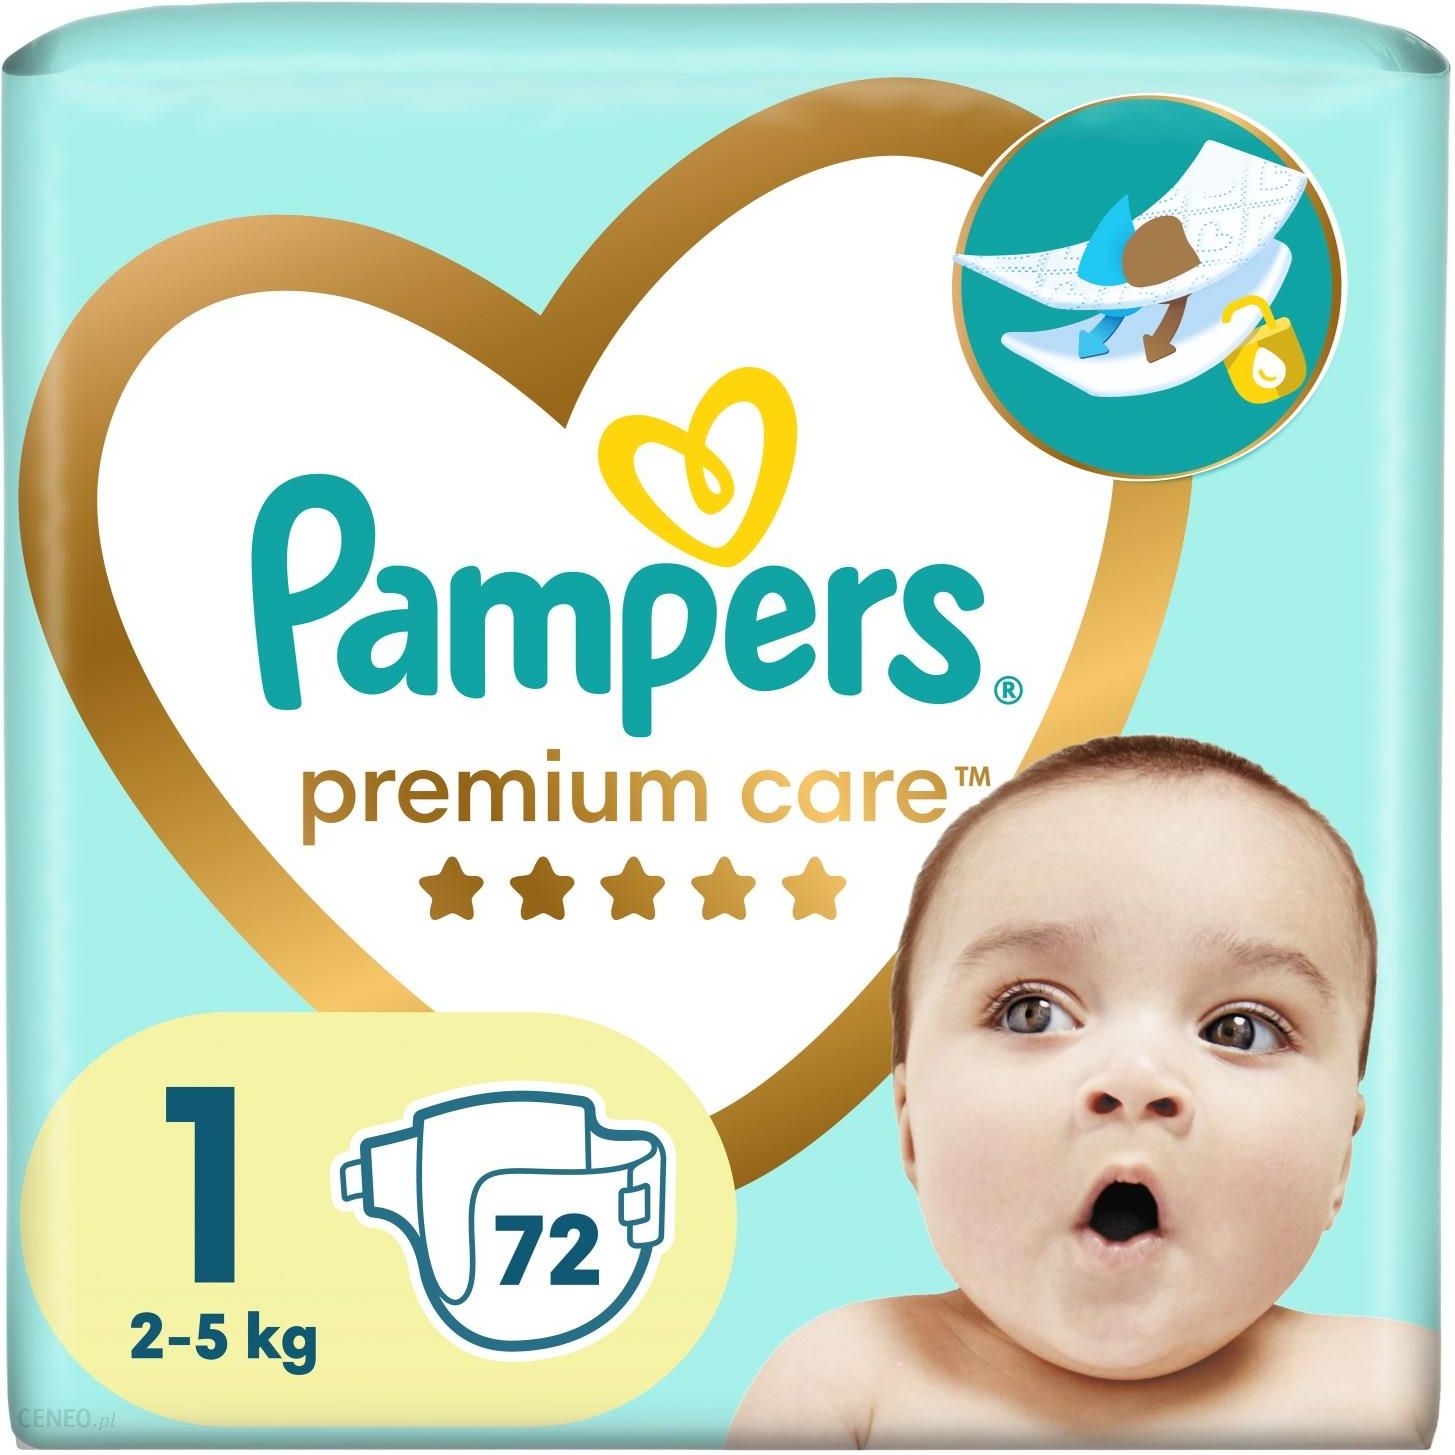 pampers 2 4-8 kg ceneo